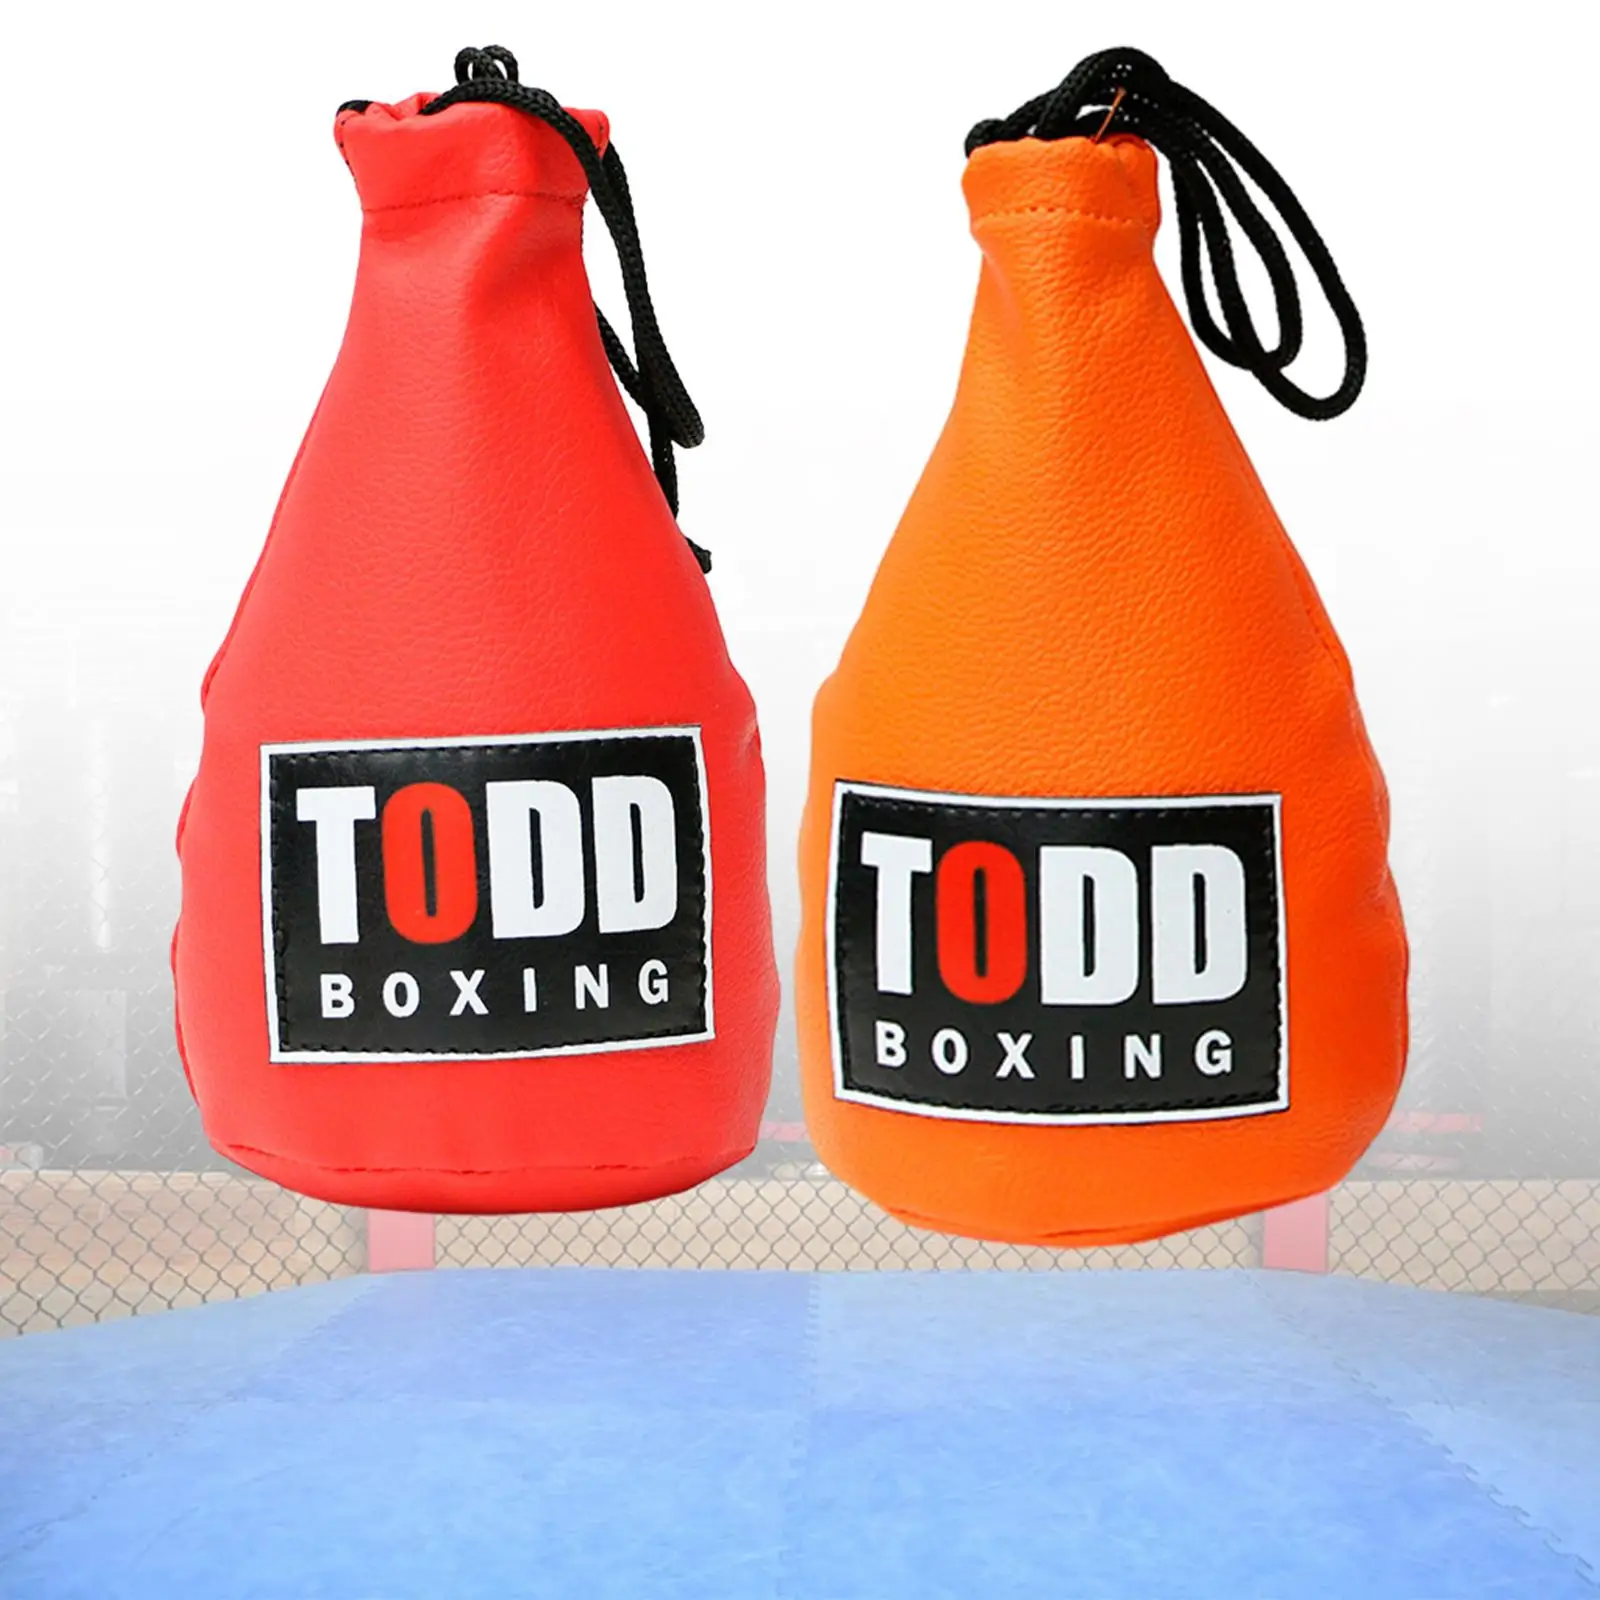 Dodge Reaction Bag Gear Mma Pendulum Training Adults Boxing Punch Bag for Punching Speed Skill Reaction Kickboxing Indoor